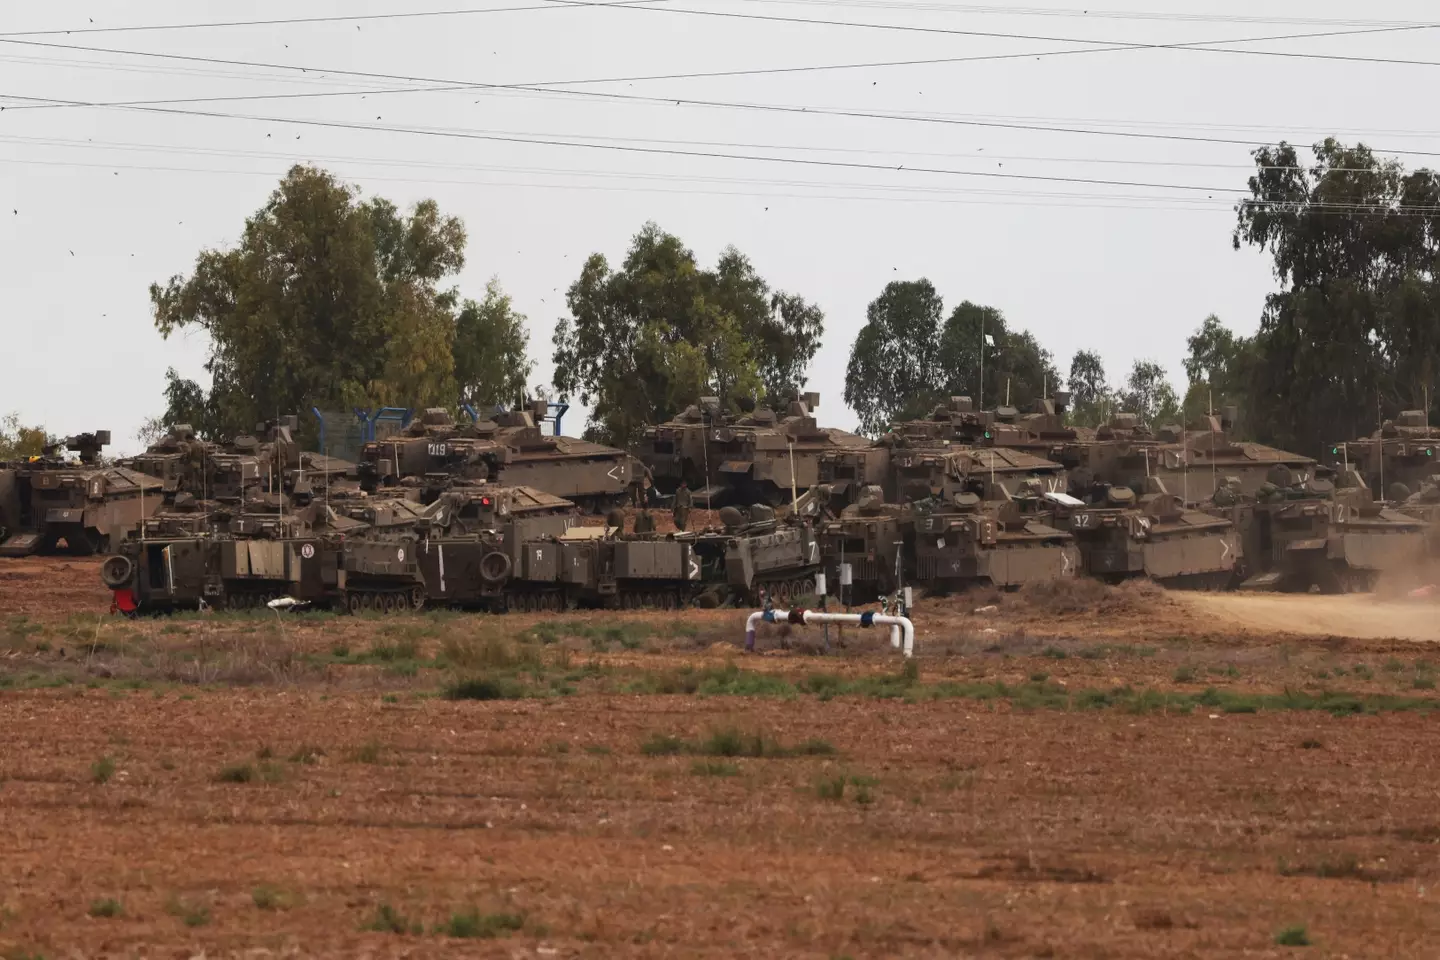 Israeli army reinforcements positioned near the city of Sderot, which is close to the border with the Gaza Strip.